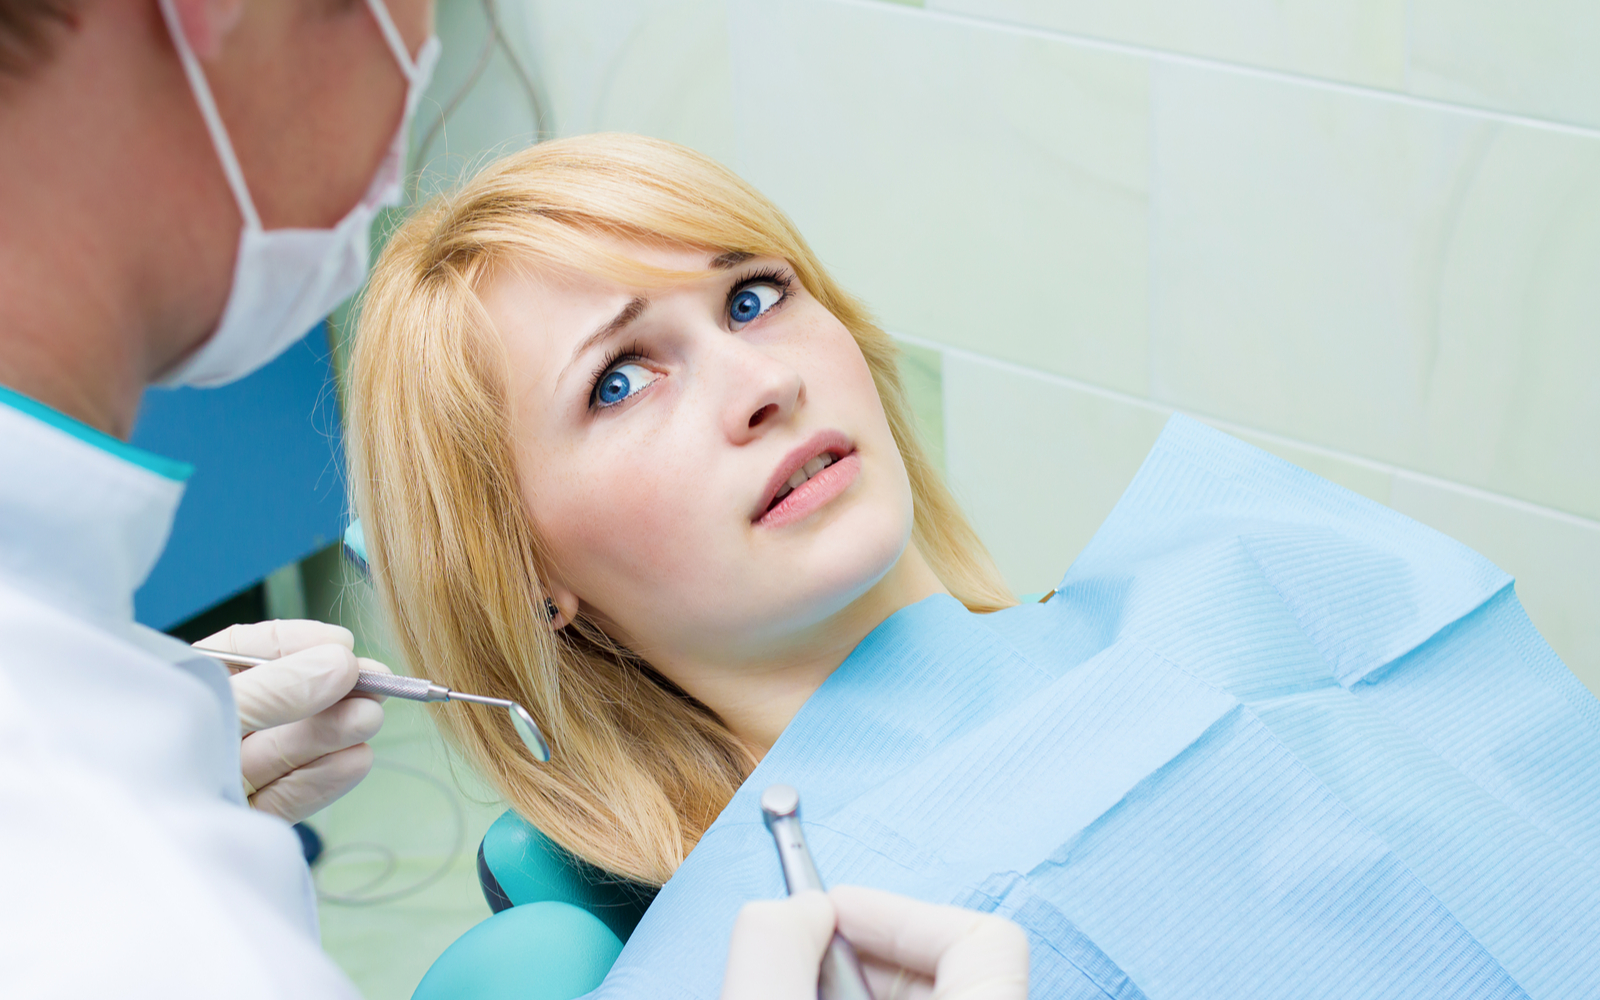 Woman with Dental Anxiety